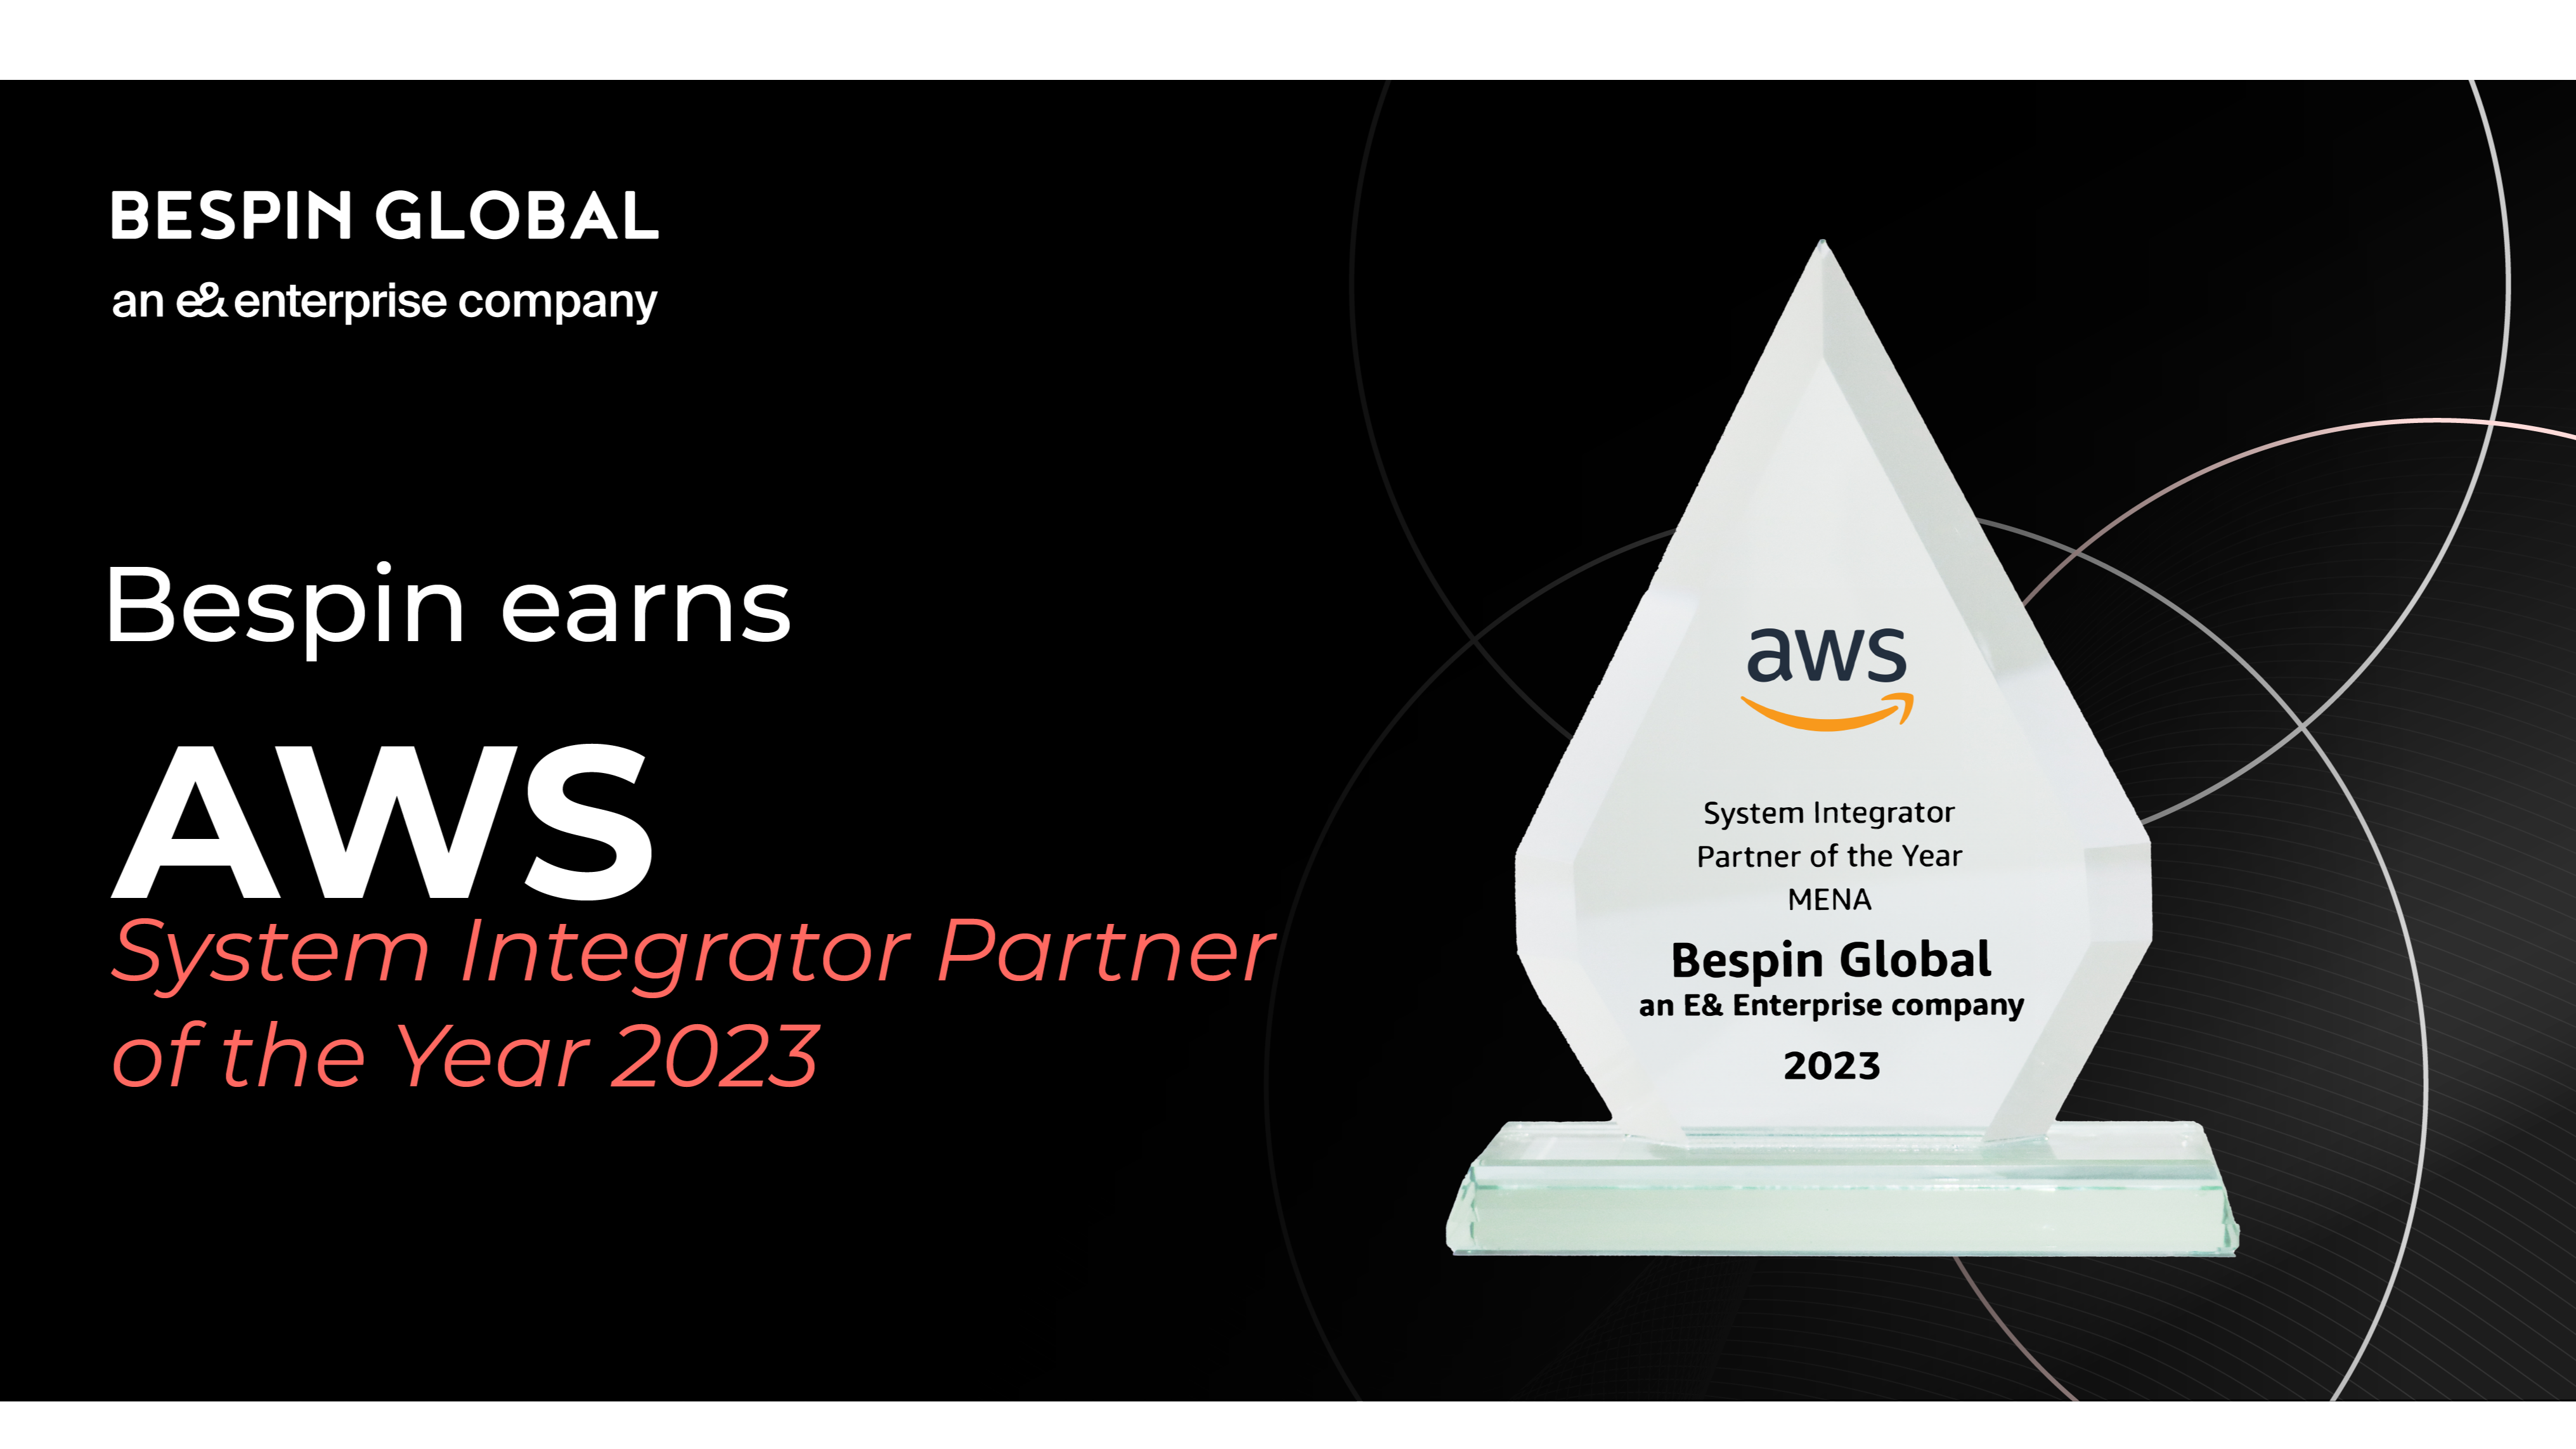 https://adgully.me/post/4654/aws-recognizes-bespin-global-mea-as-system-integrator-partner-of-the-year